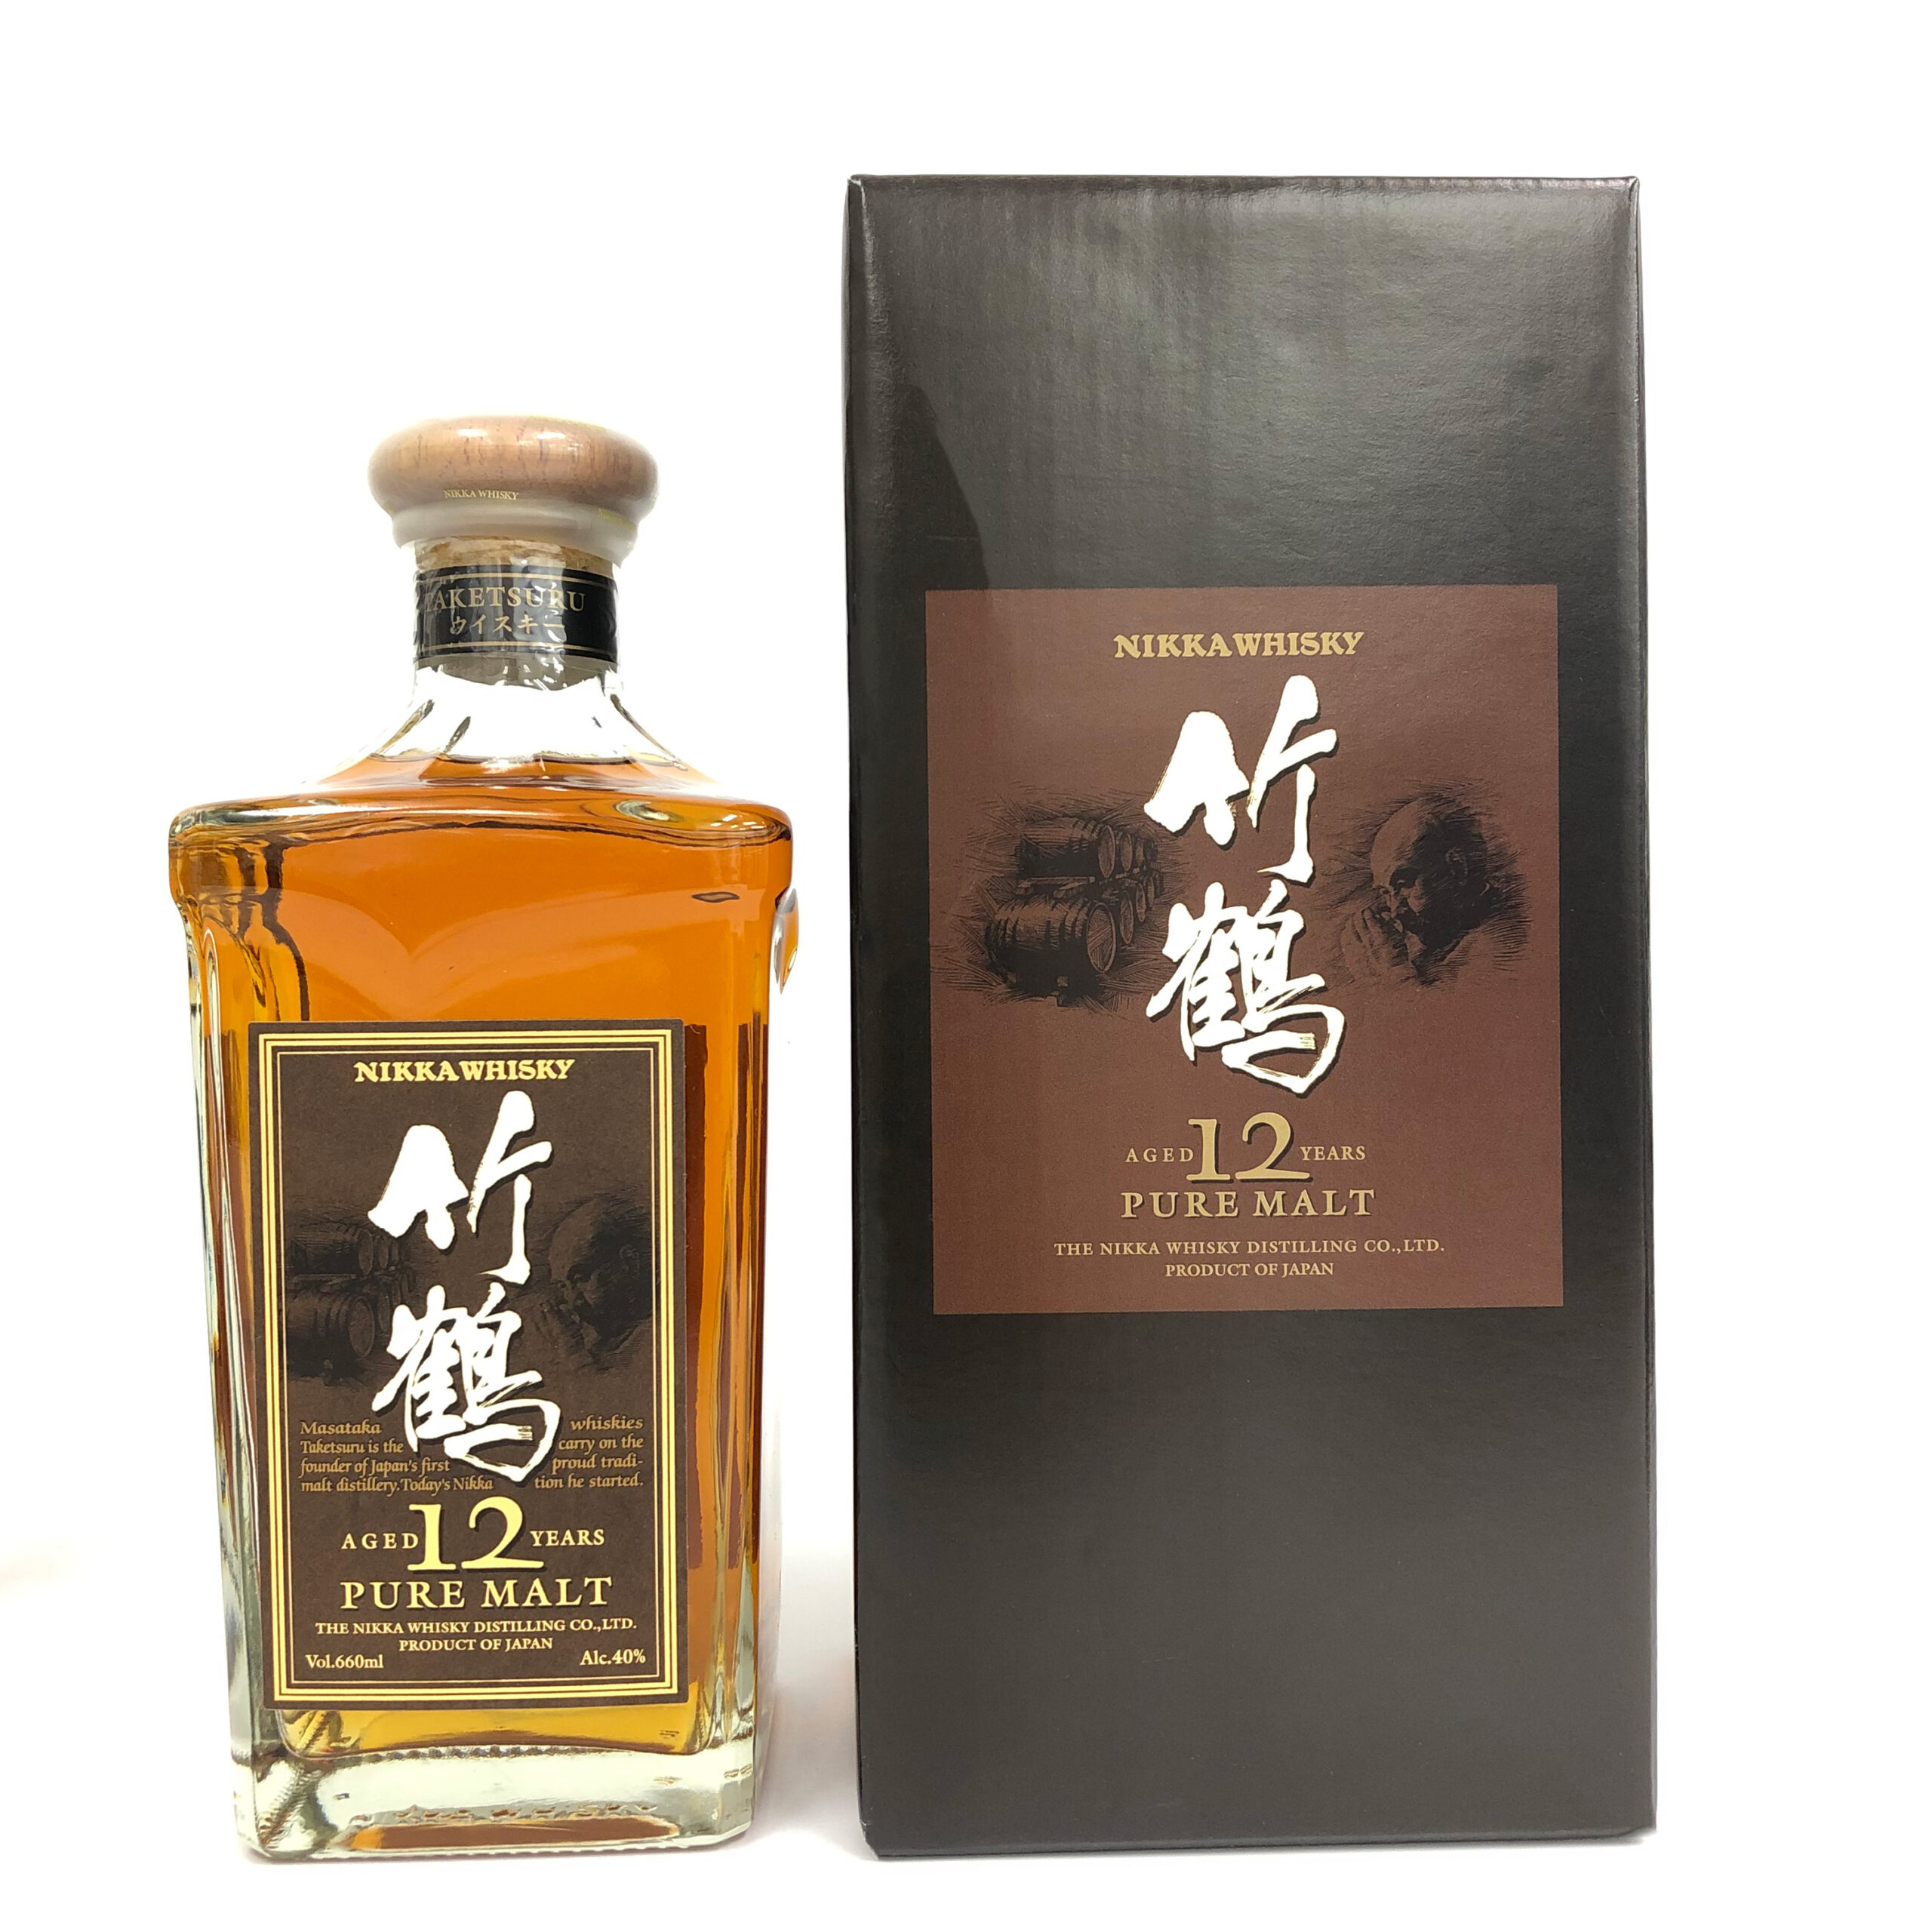 【Nikka Taketsuru series.】「Nikka Taketsuru 12year.」Inheriting the founder Masataka Taketsuru's wish "Let as many Japanese as possible enjoy authentic whisky", the whisky has two attractions: "deep richness and flavor" and "soft and easy drinking".